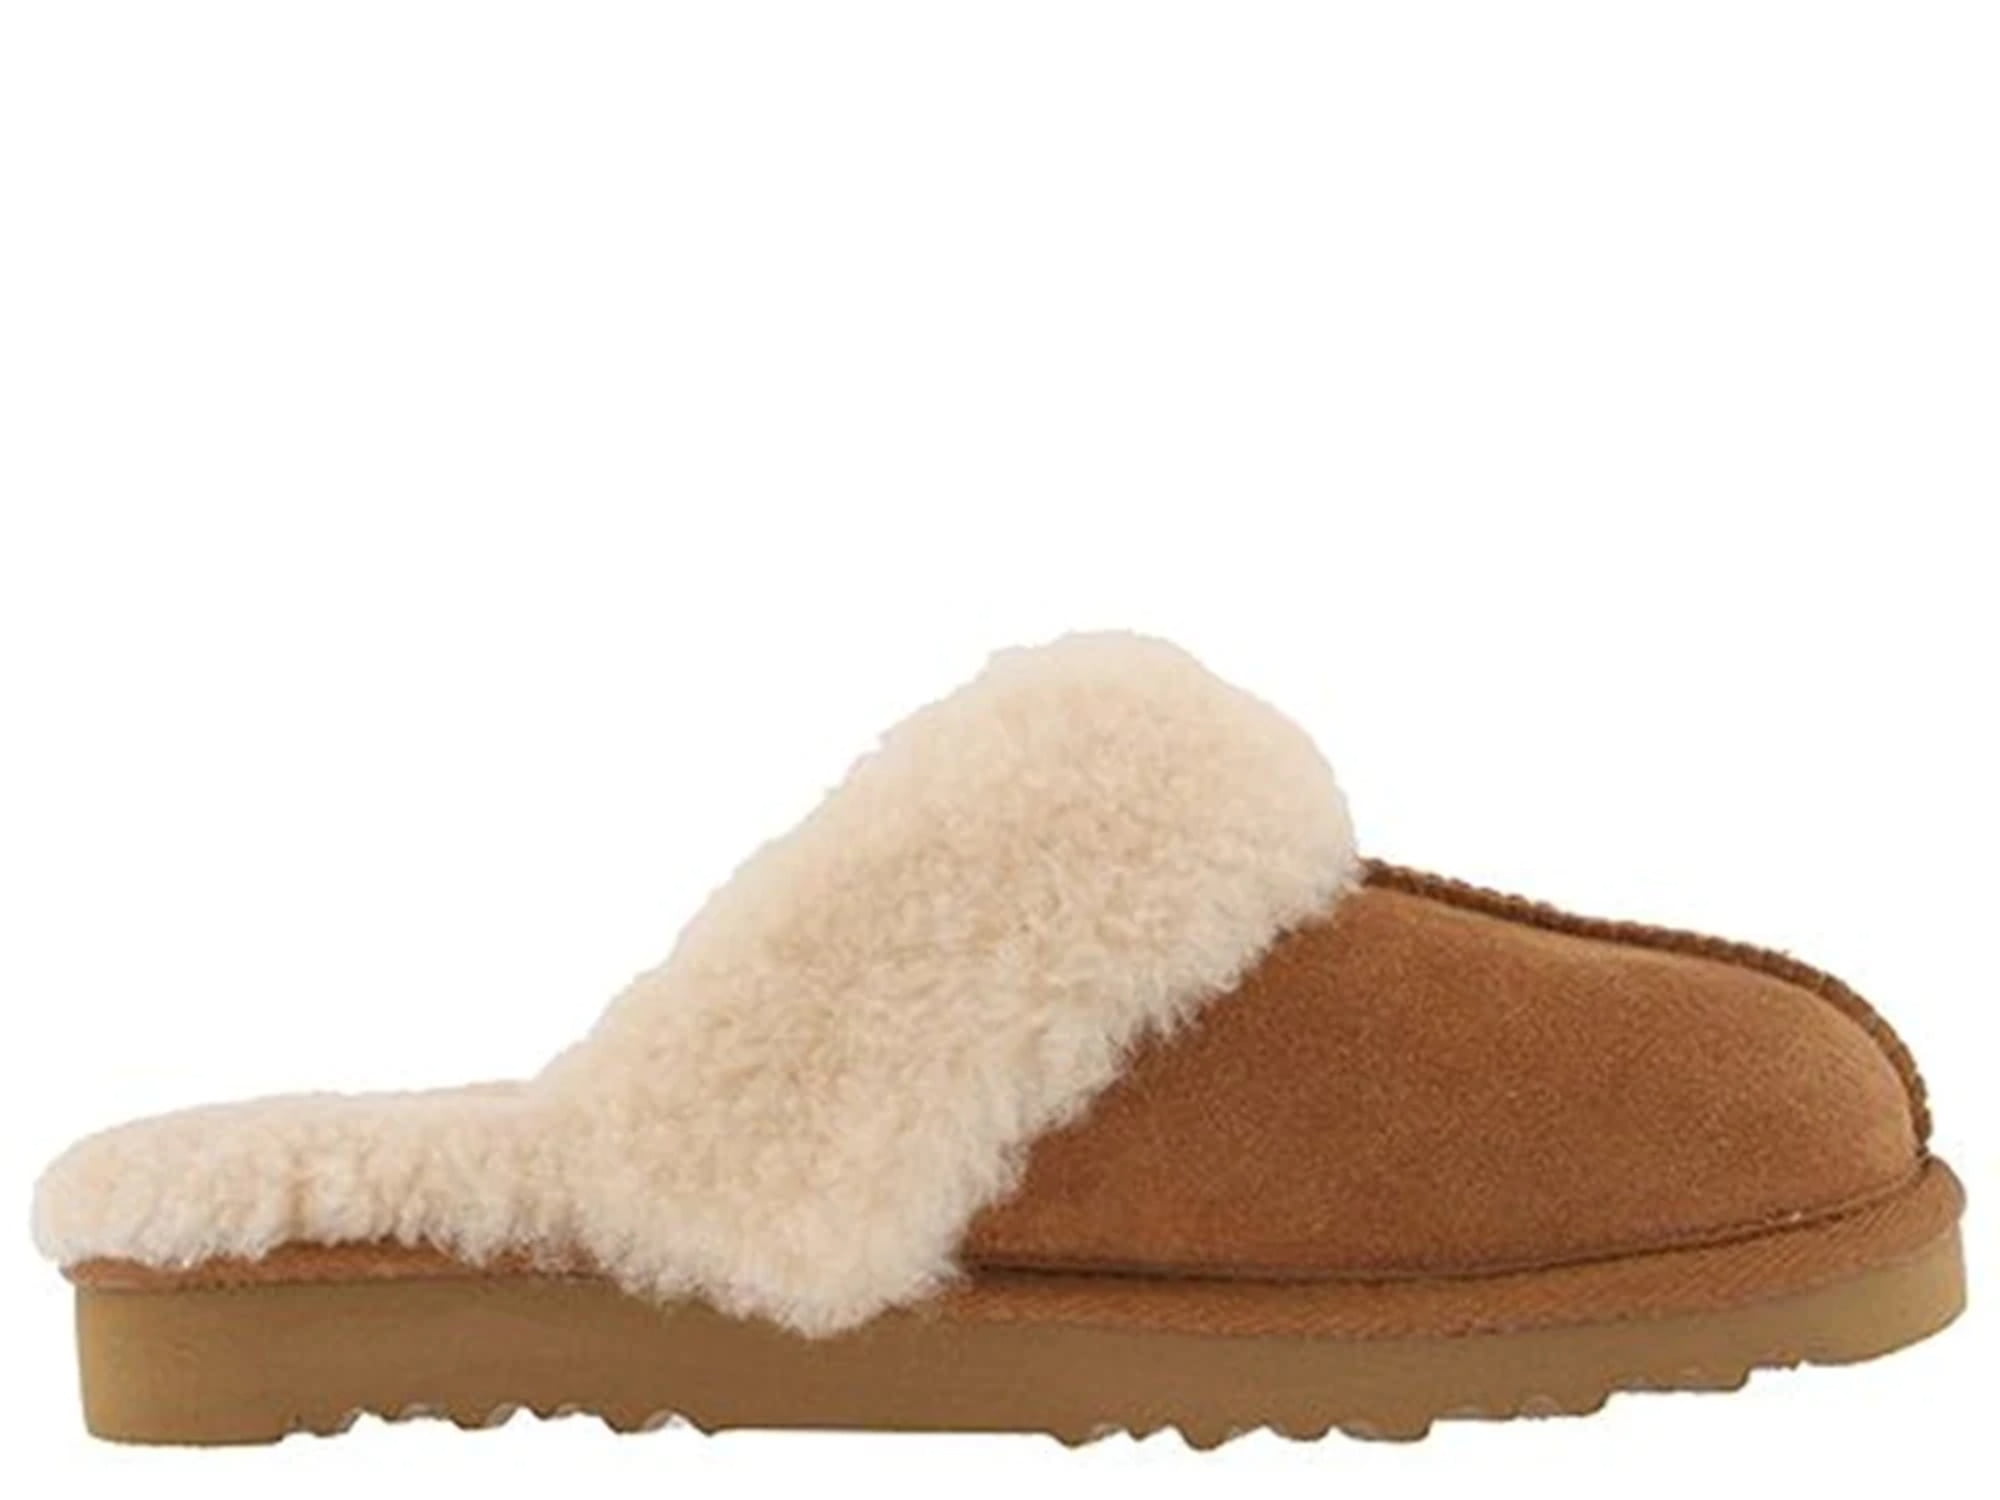 UGG Cozy Slipper in Echinacea Size US 8 | Slippers cozy, Uggs, Slippers